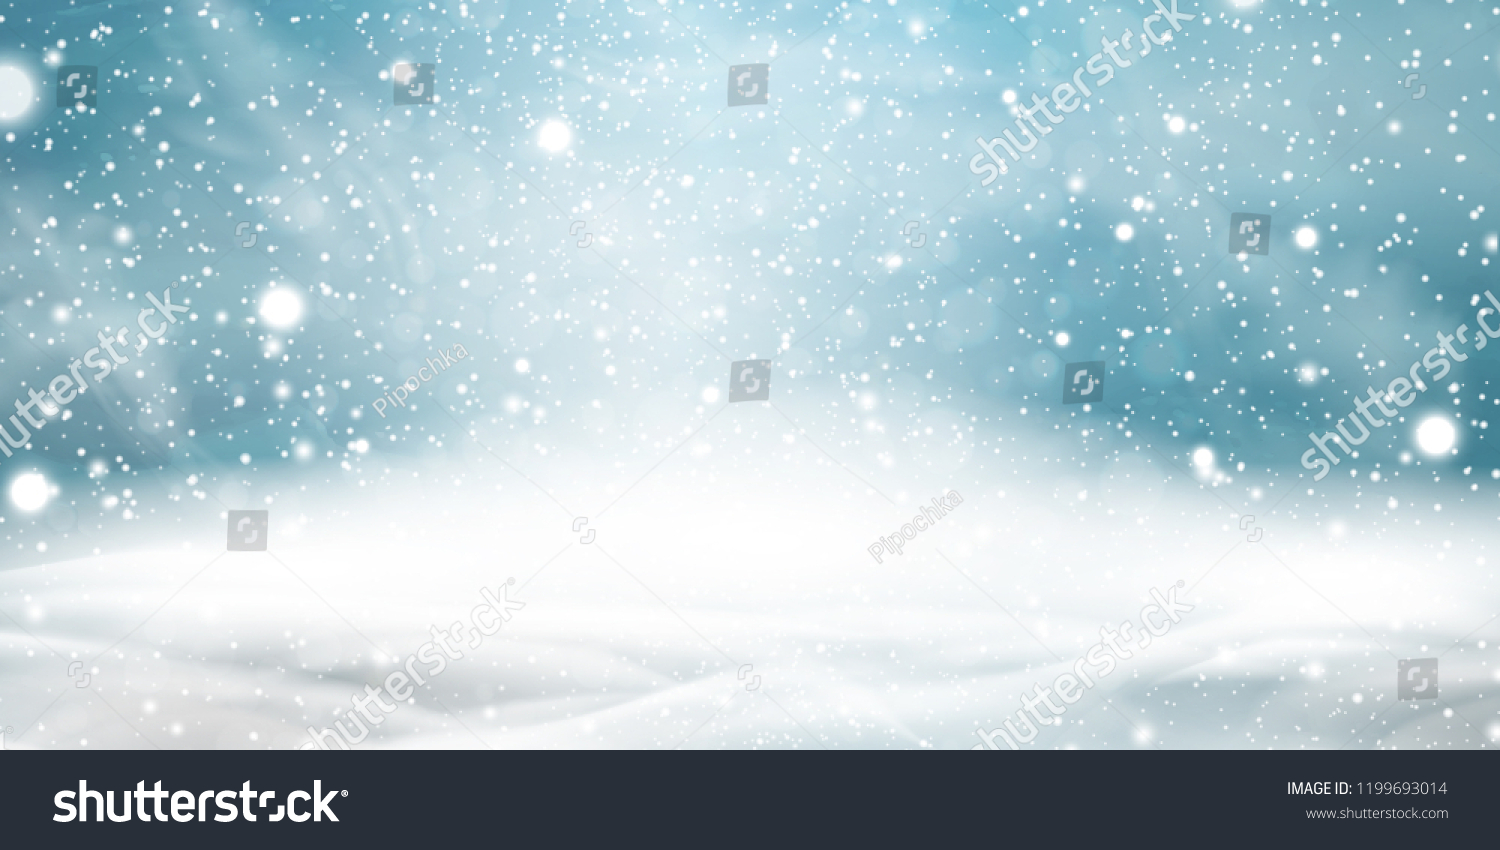 Natural Winter Christmas background with sky, heavy snowfall, snowflakes in different shapes and forms, snowdrifts. Winter landscape with falling christmas shining beautiful snow. vector. #1199693014